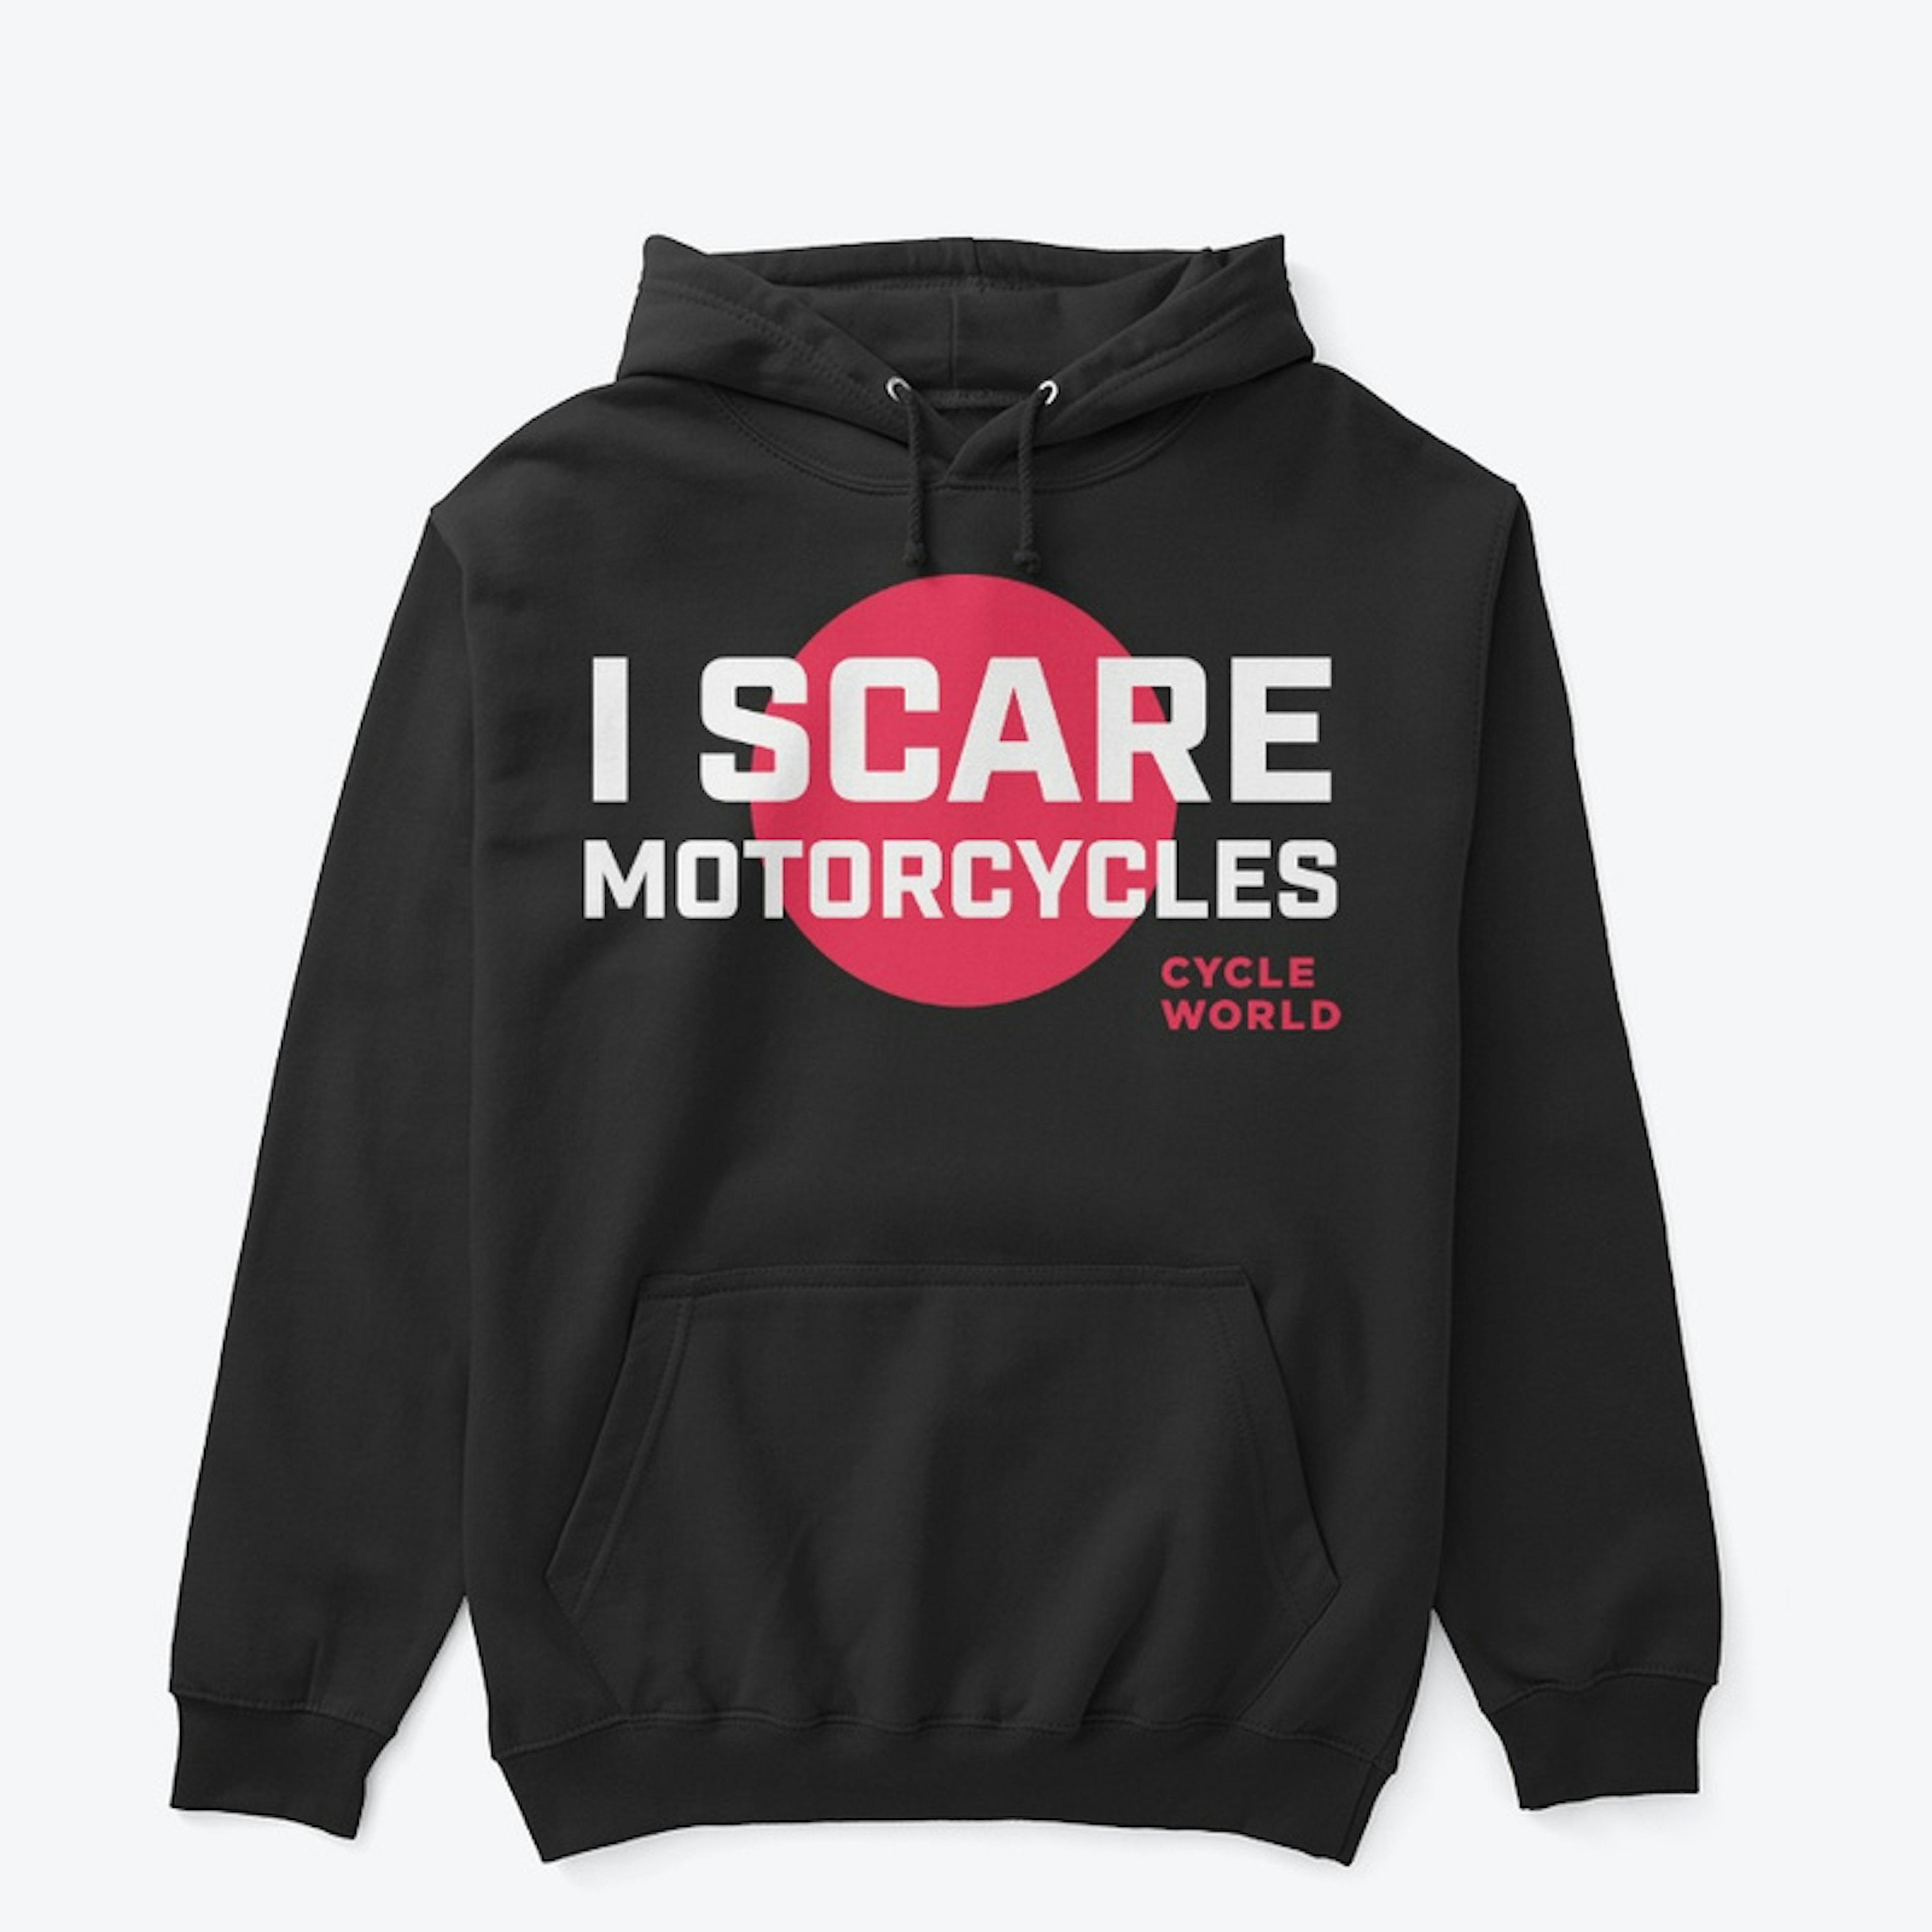 I Scare Motorcycles